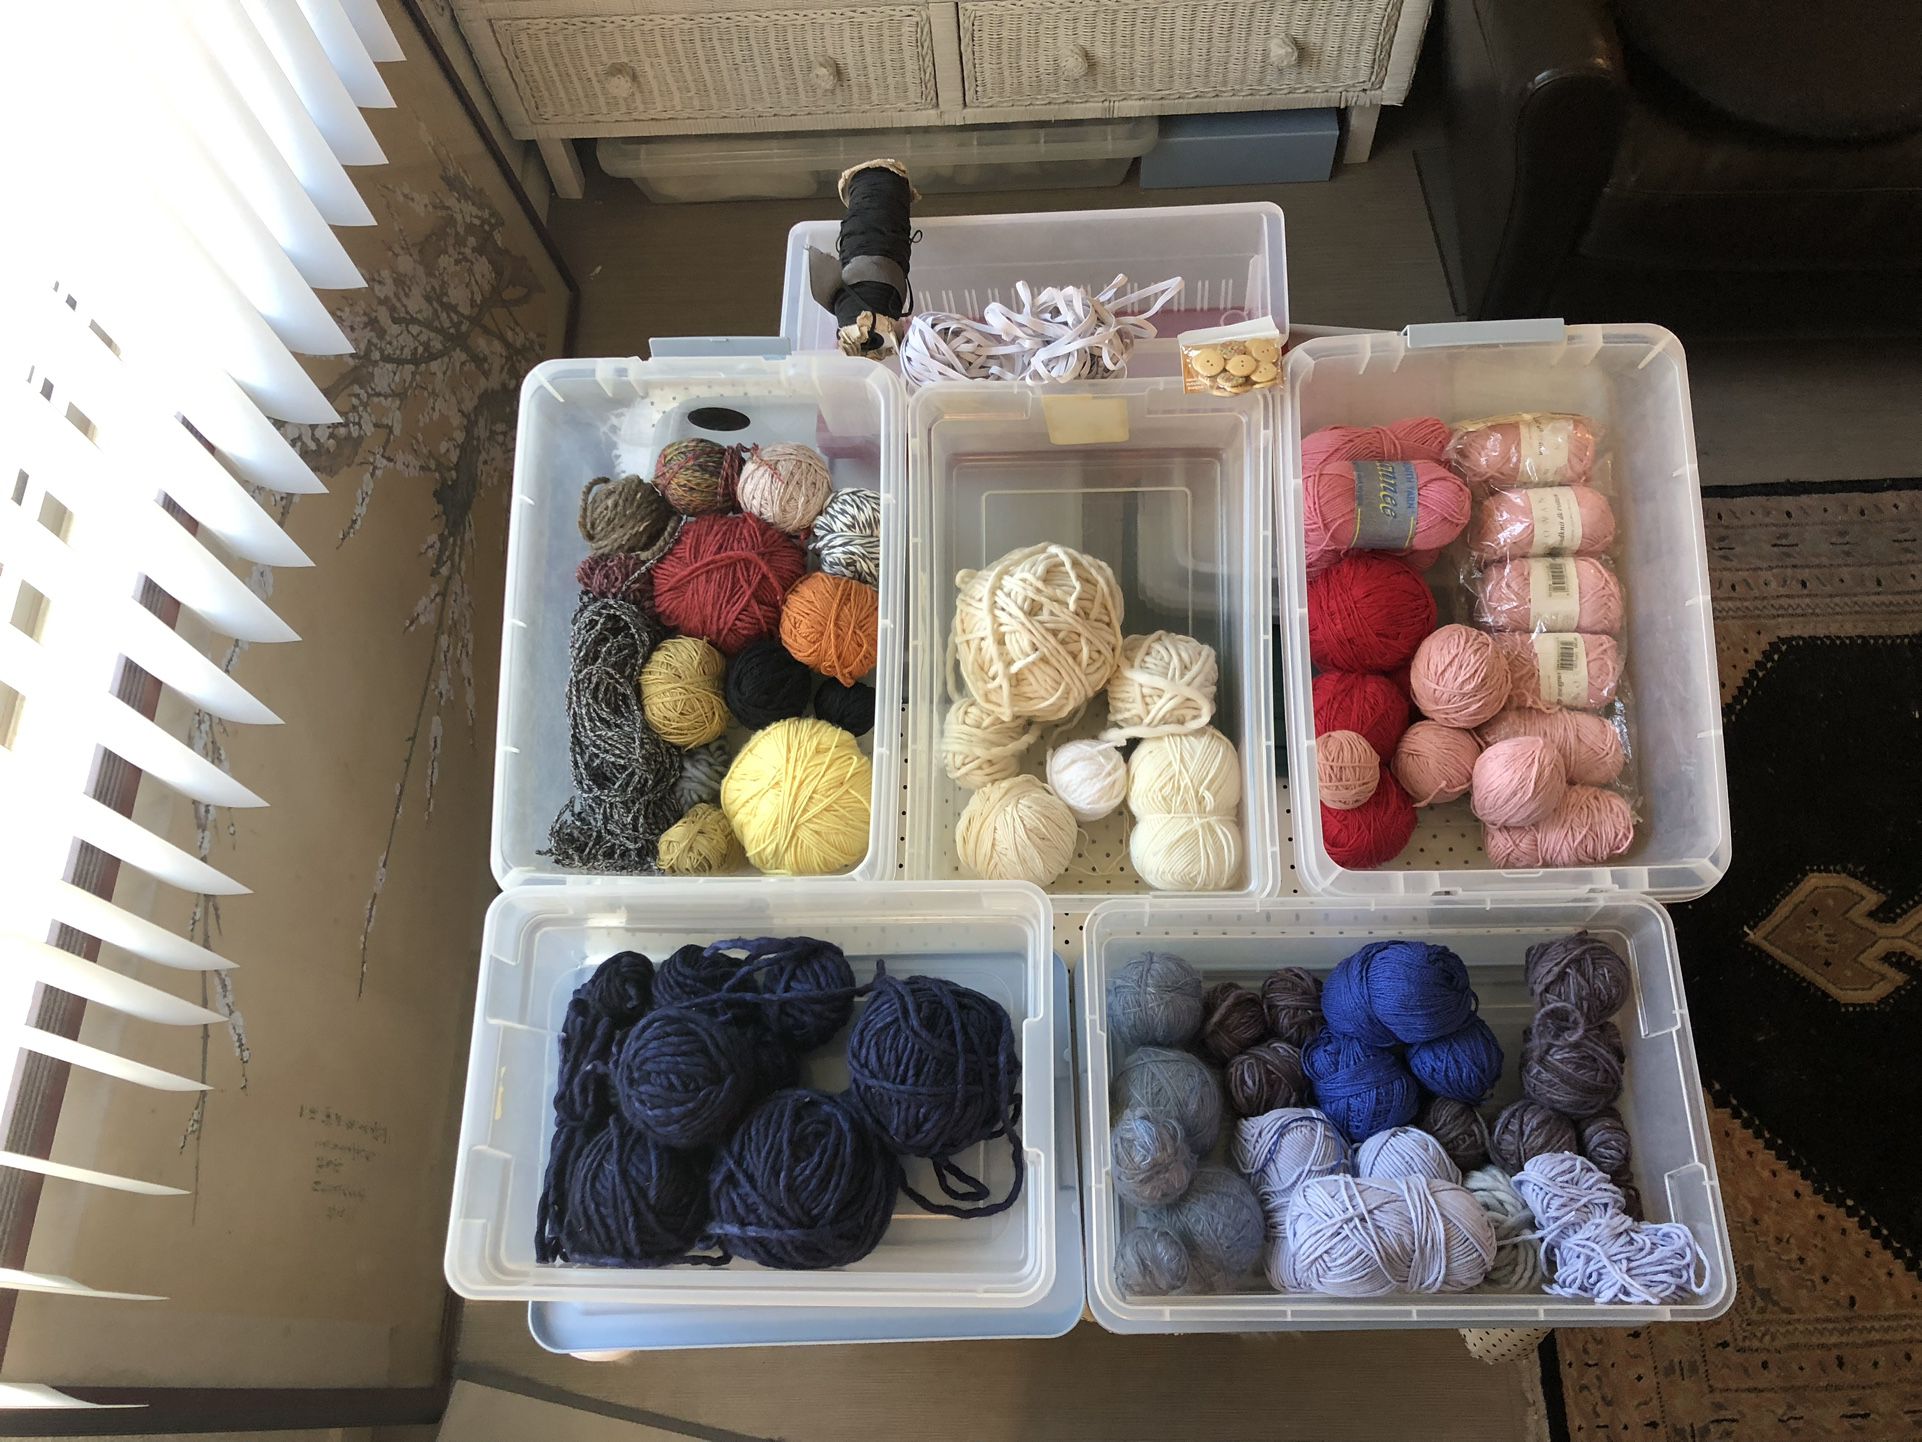 Balls of Yarn Cotton, Cotton Blends, & Wool in 6 storage bins with Lids